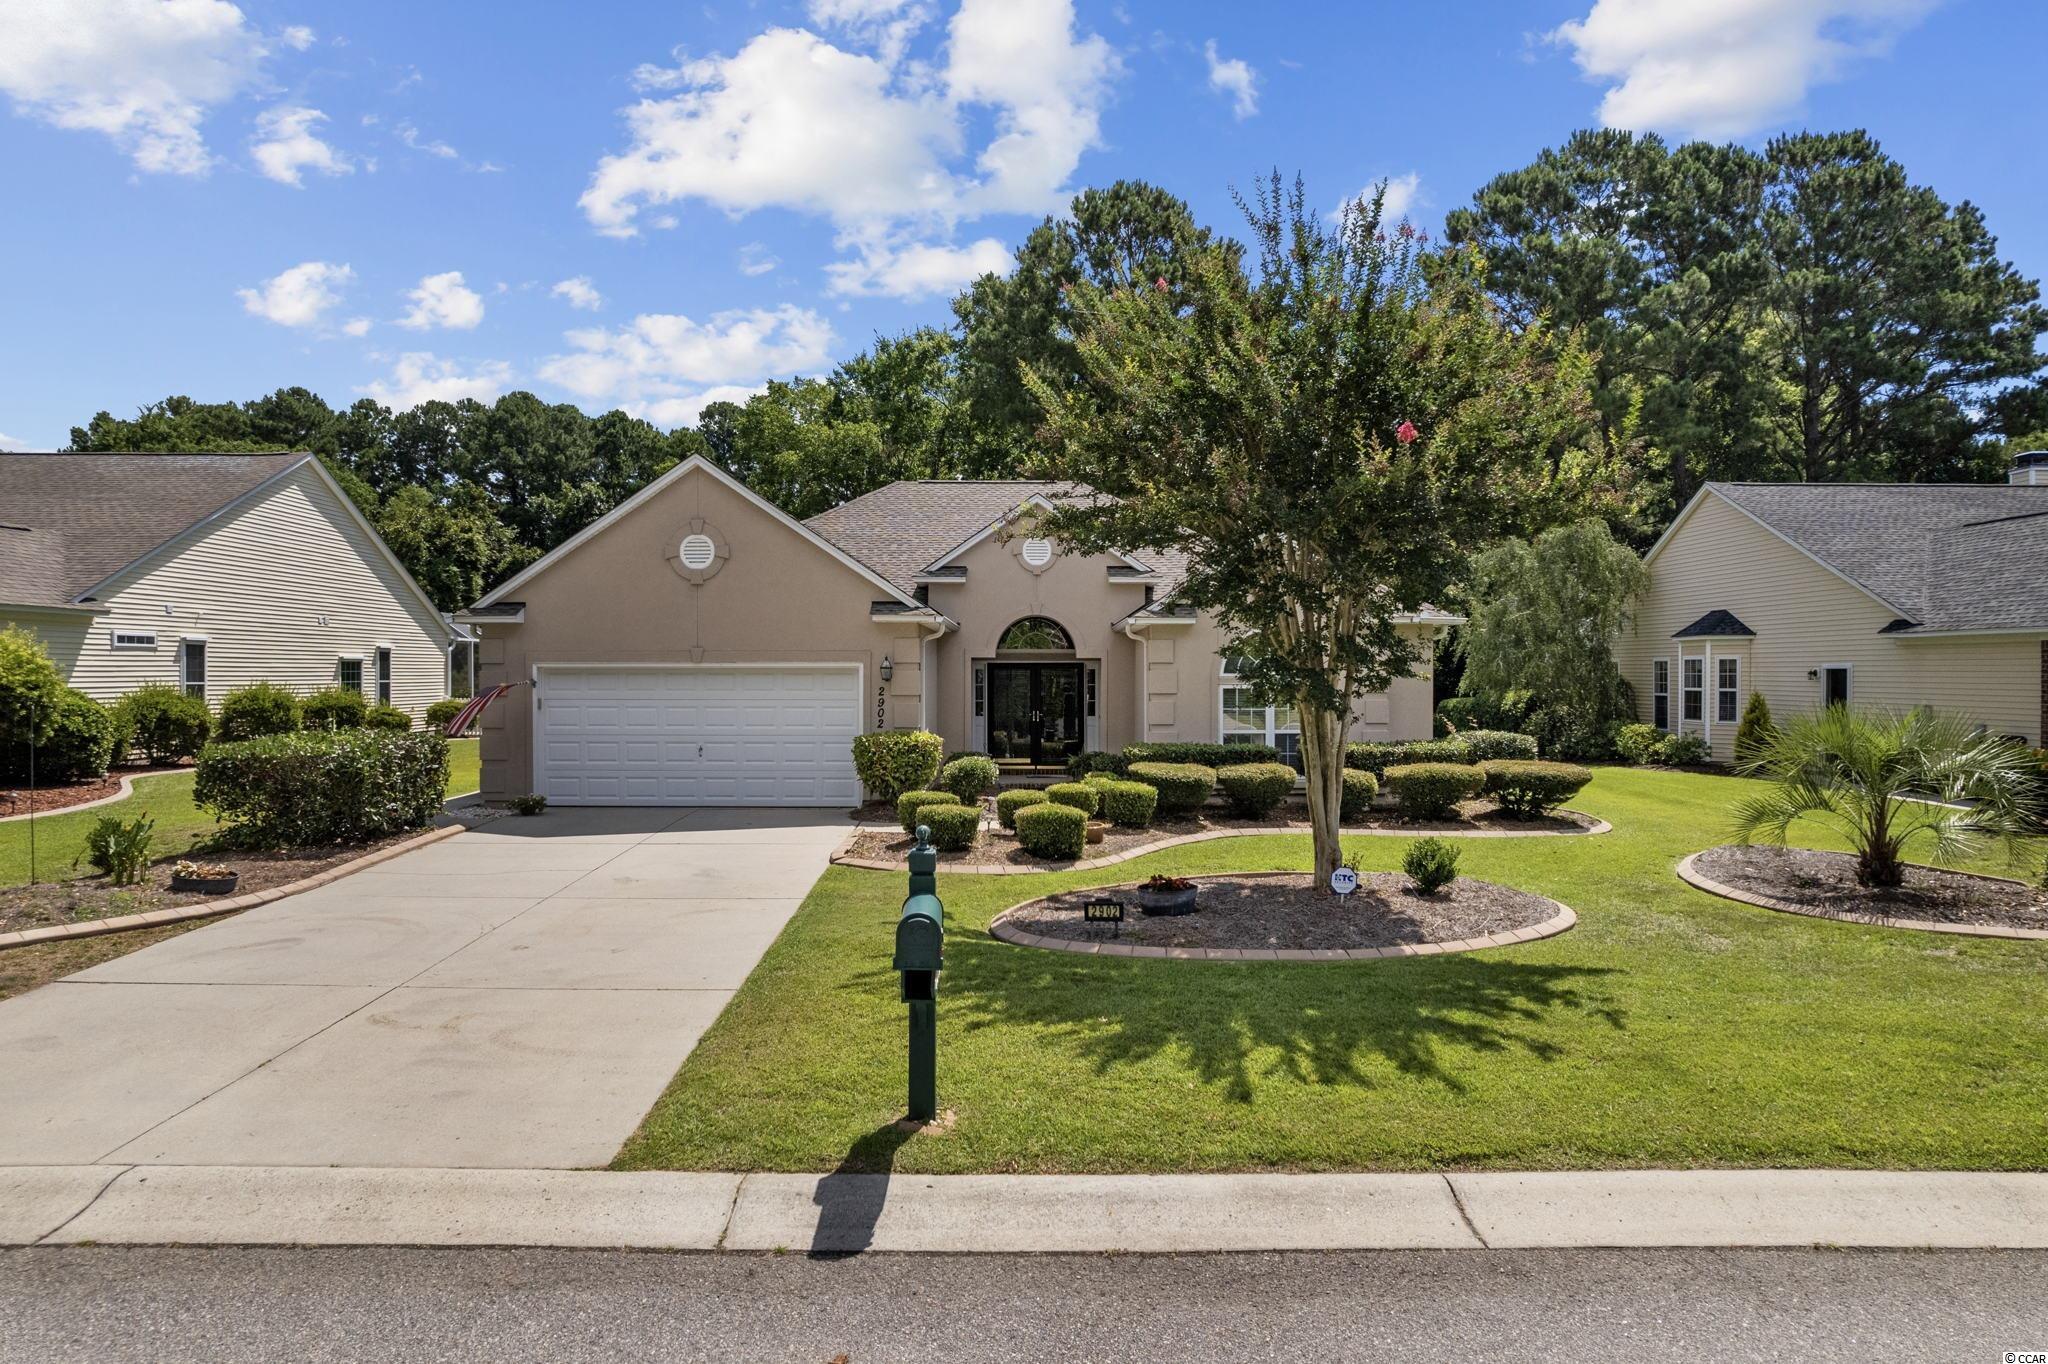 2902 Whooping Crane Dr. North Myrtle Beach, SC 29582